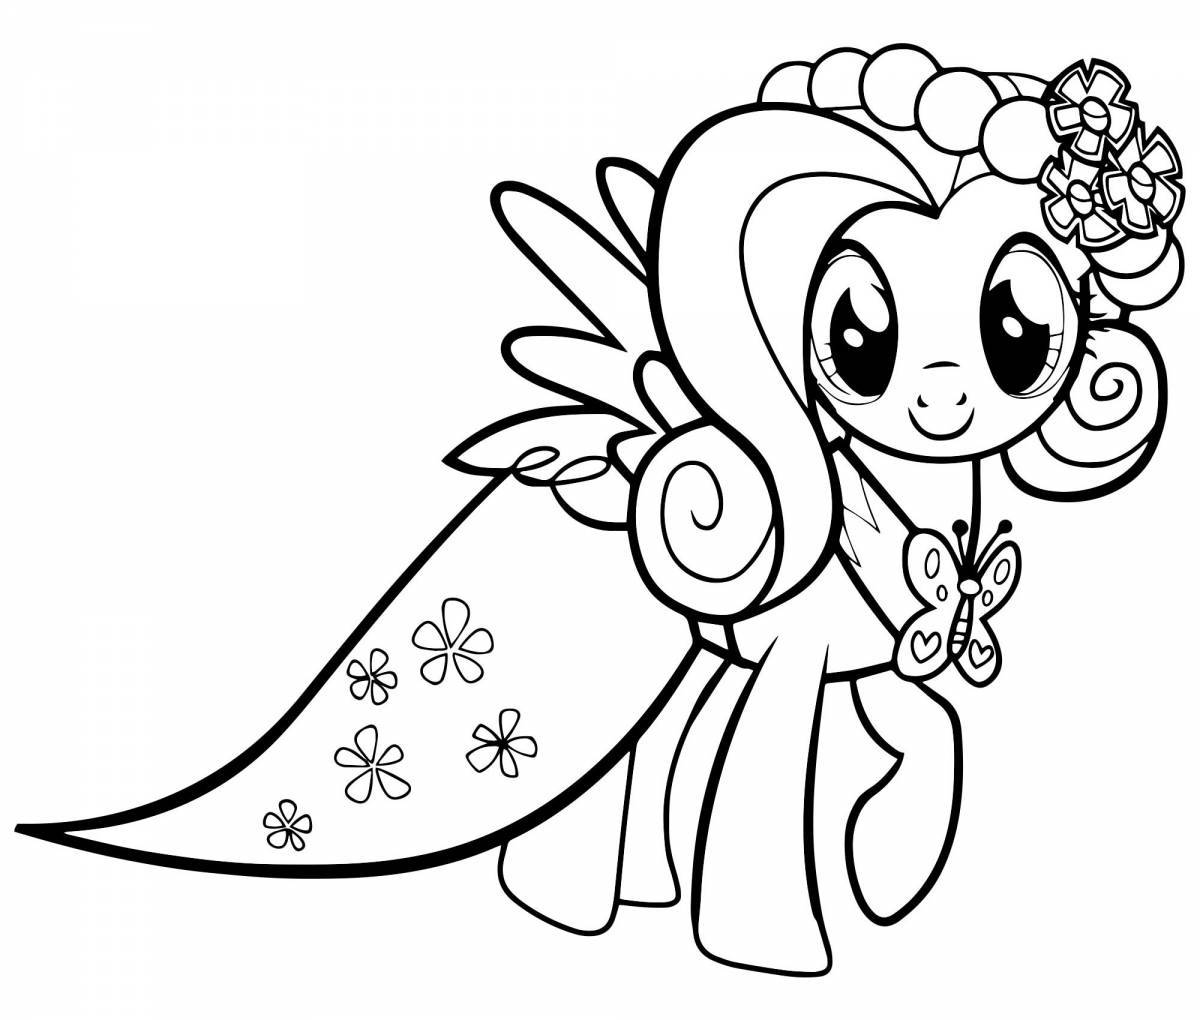 Sparkling pony coloring book for children 5-6 years old